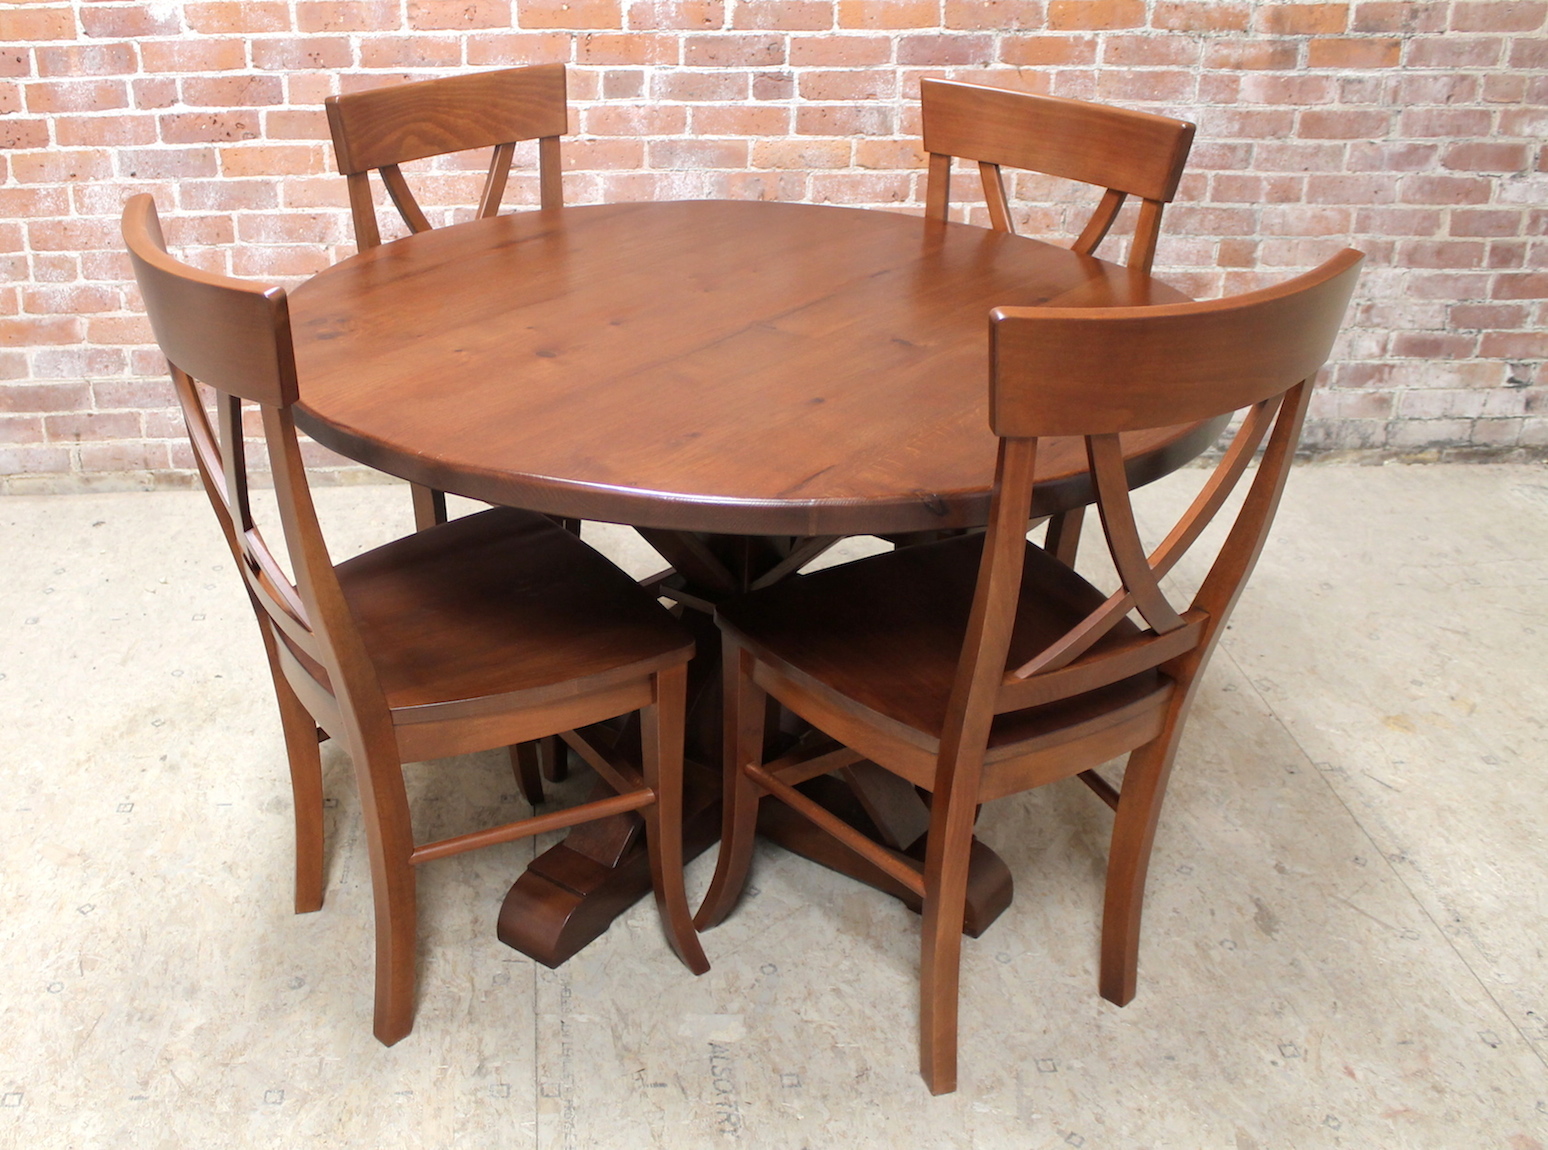 48 Round Oak Table In Brown Cherry, 48 Round Oak Dining Table With Leaf